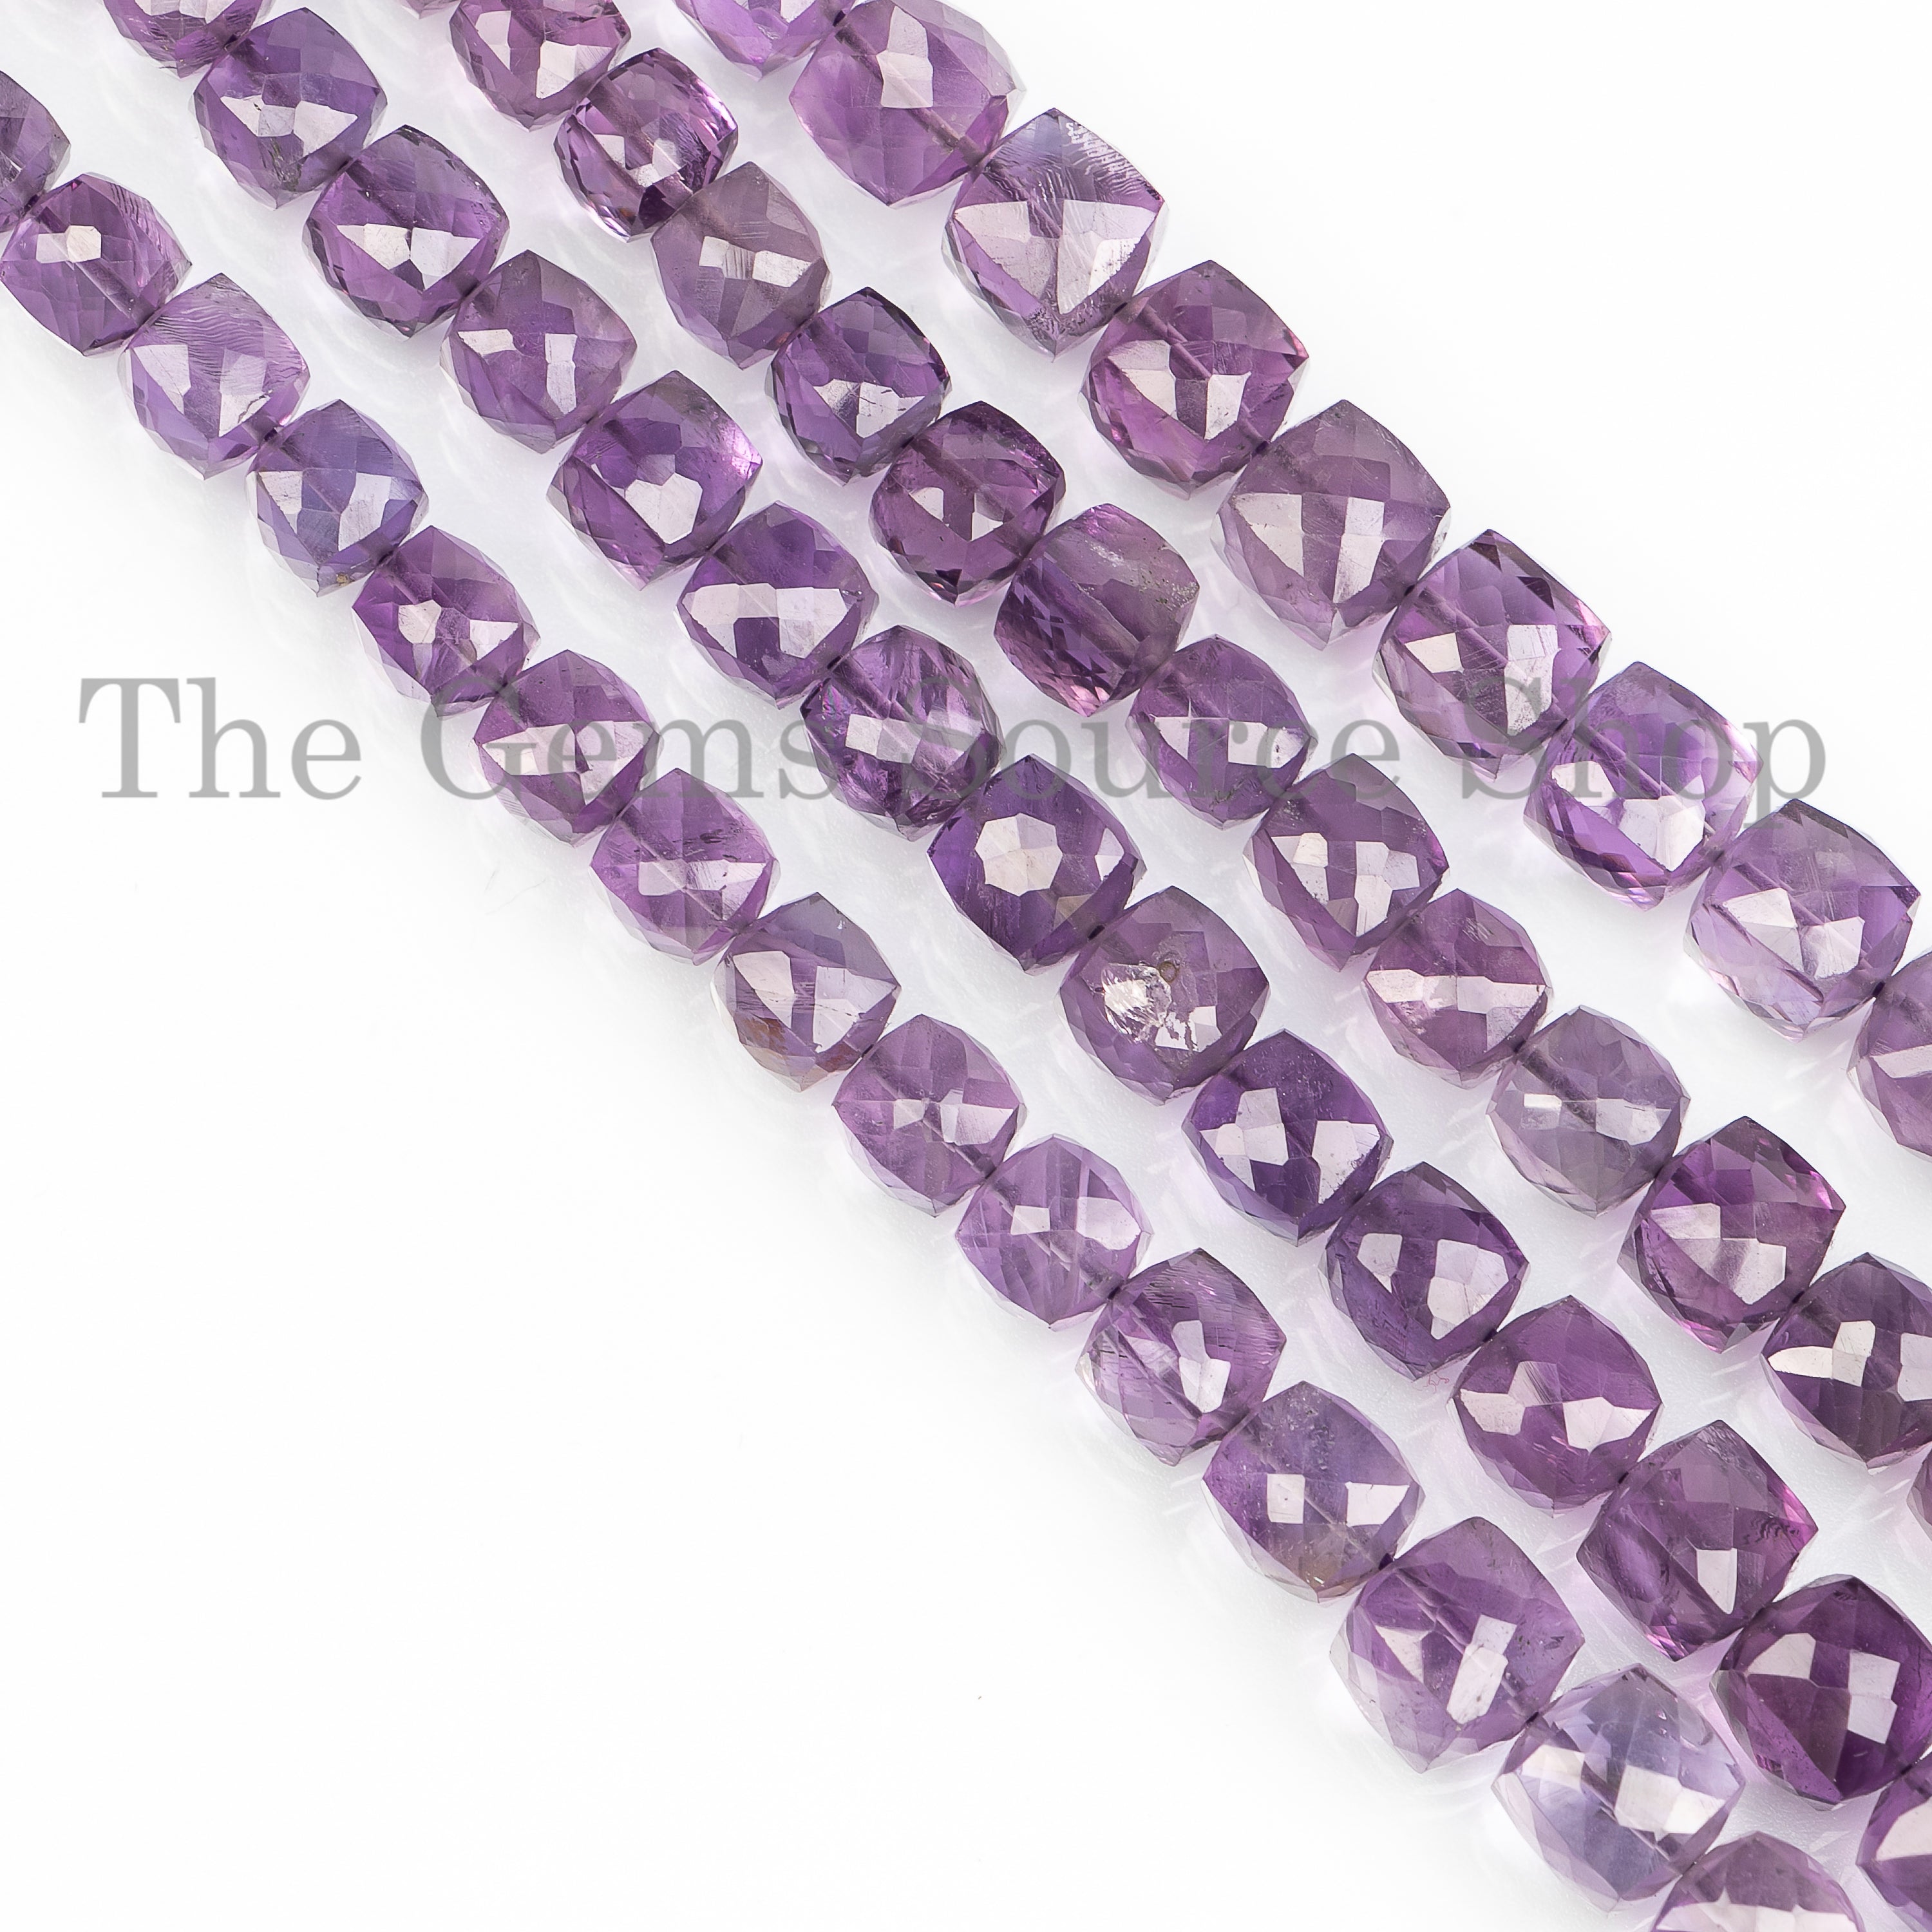 6-8.5 mm Amethyst Beads, Amethyst Faceted Beads, Amethyst box Shape Natural Beads, Amethyst faceted Gemstone Beads, Amethyst Jewelry Beads